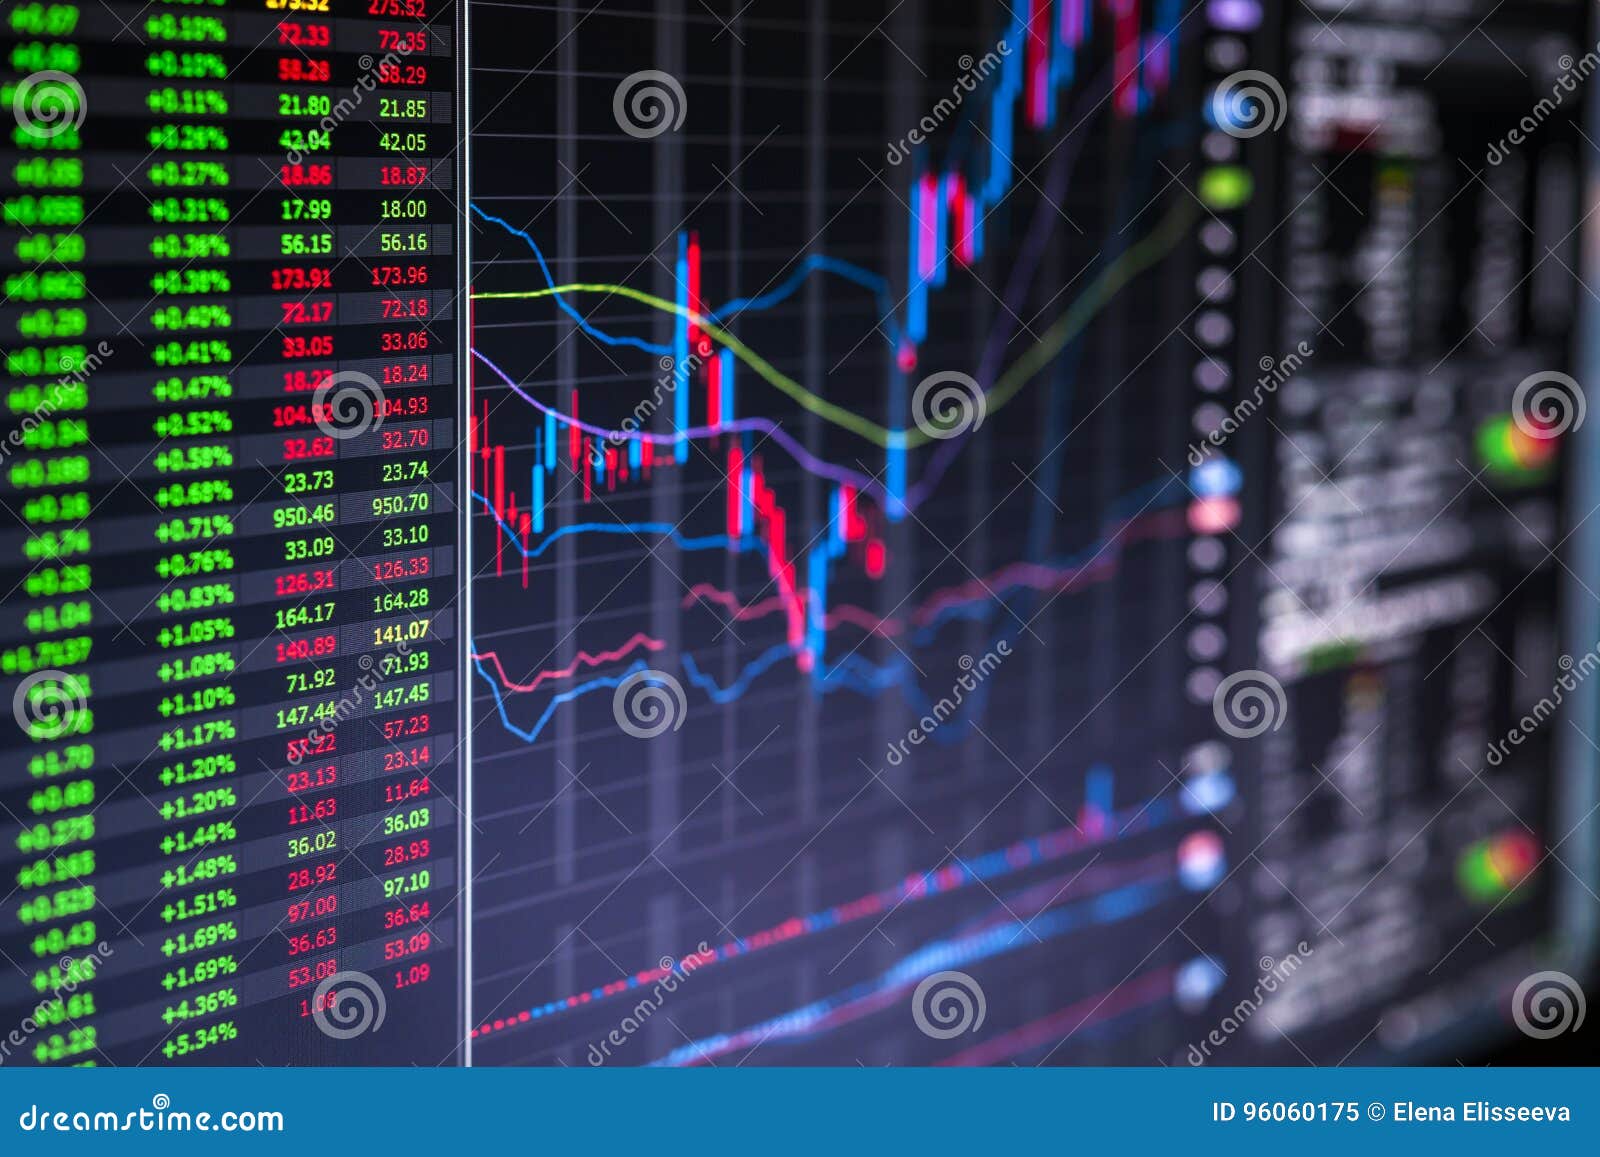 Trading screen stock image. Image of online, internet - 96060175